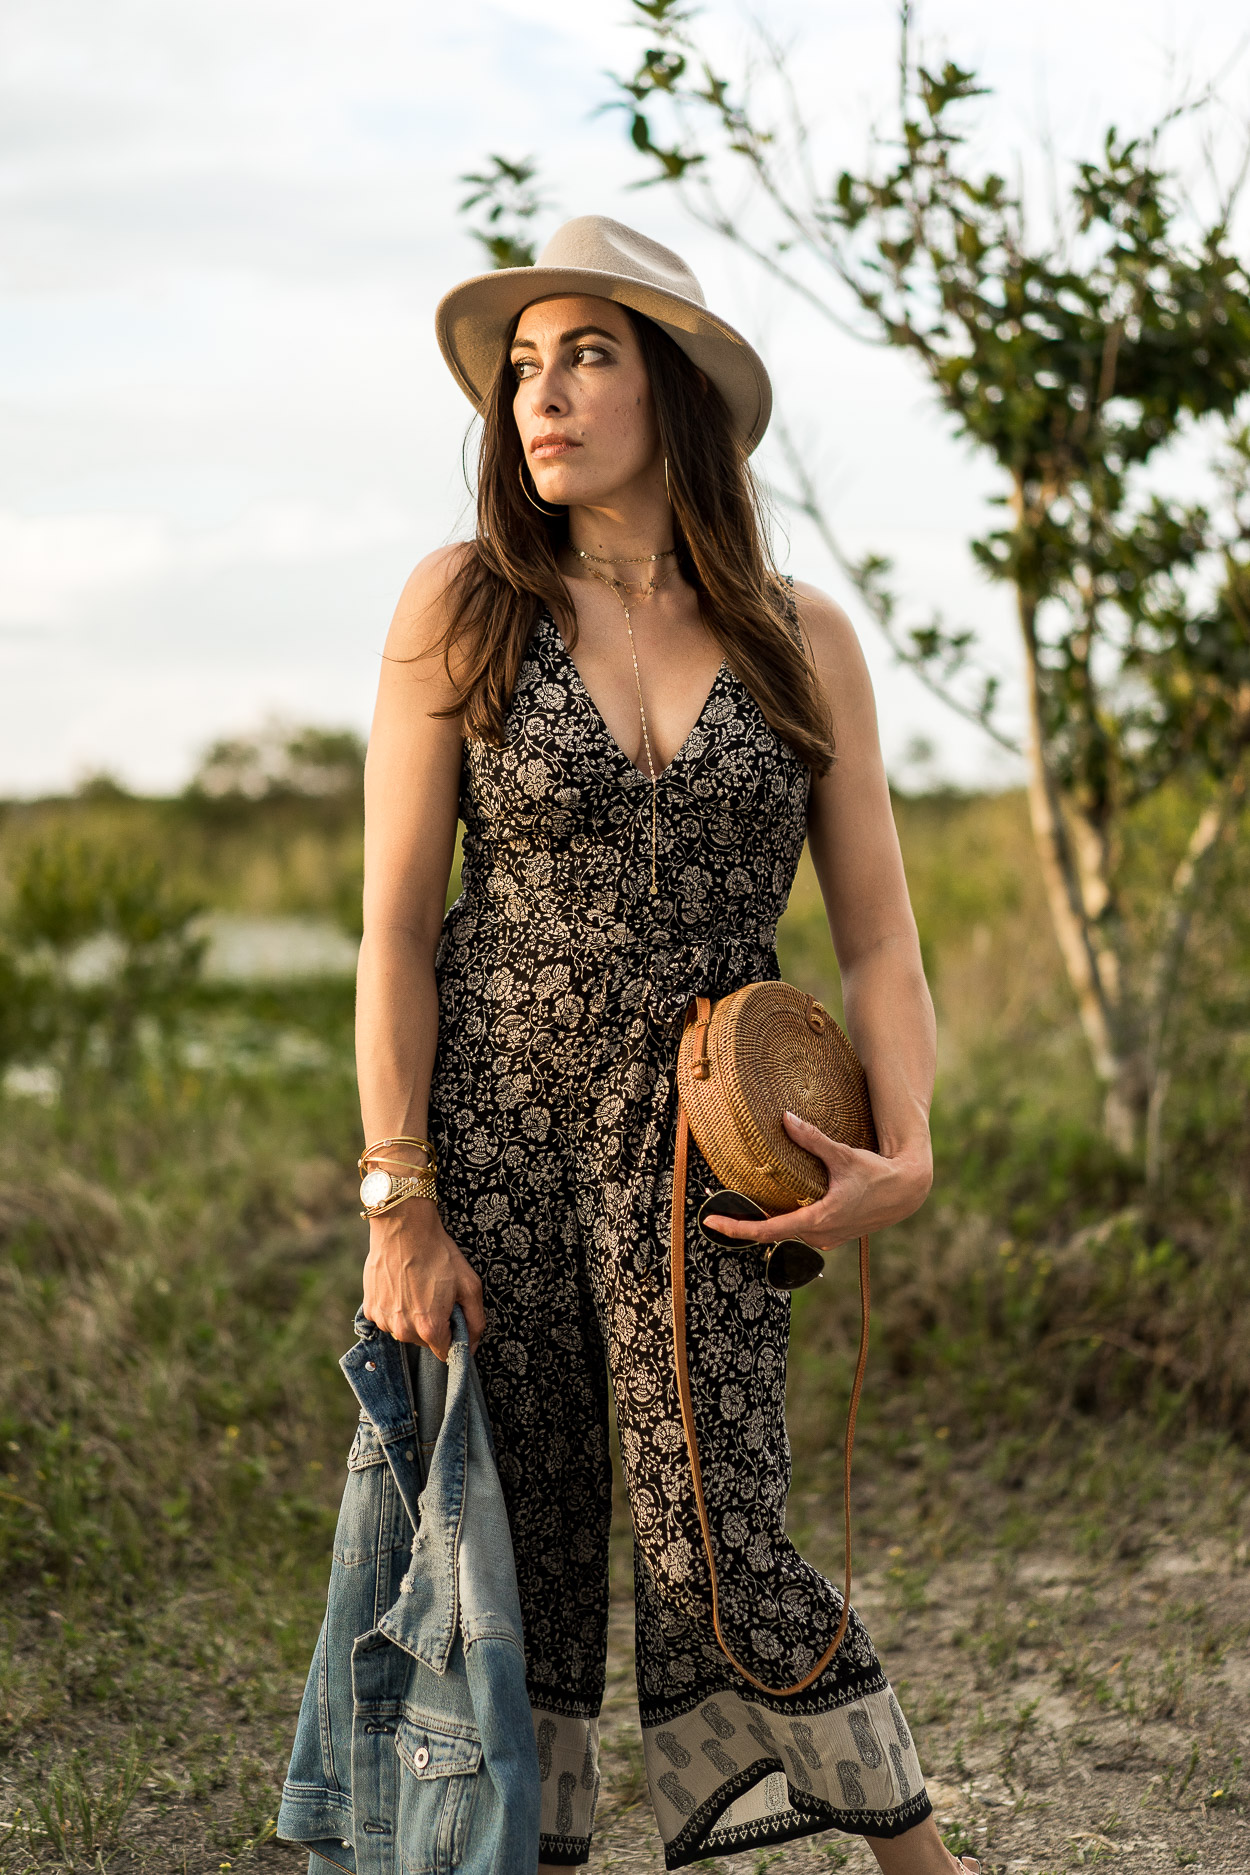 Summer boho style modeled by Amanda of A Glam Lifestyle blog in an Amuse Society jumpsuit and round basket bag